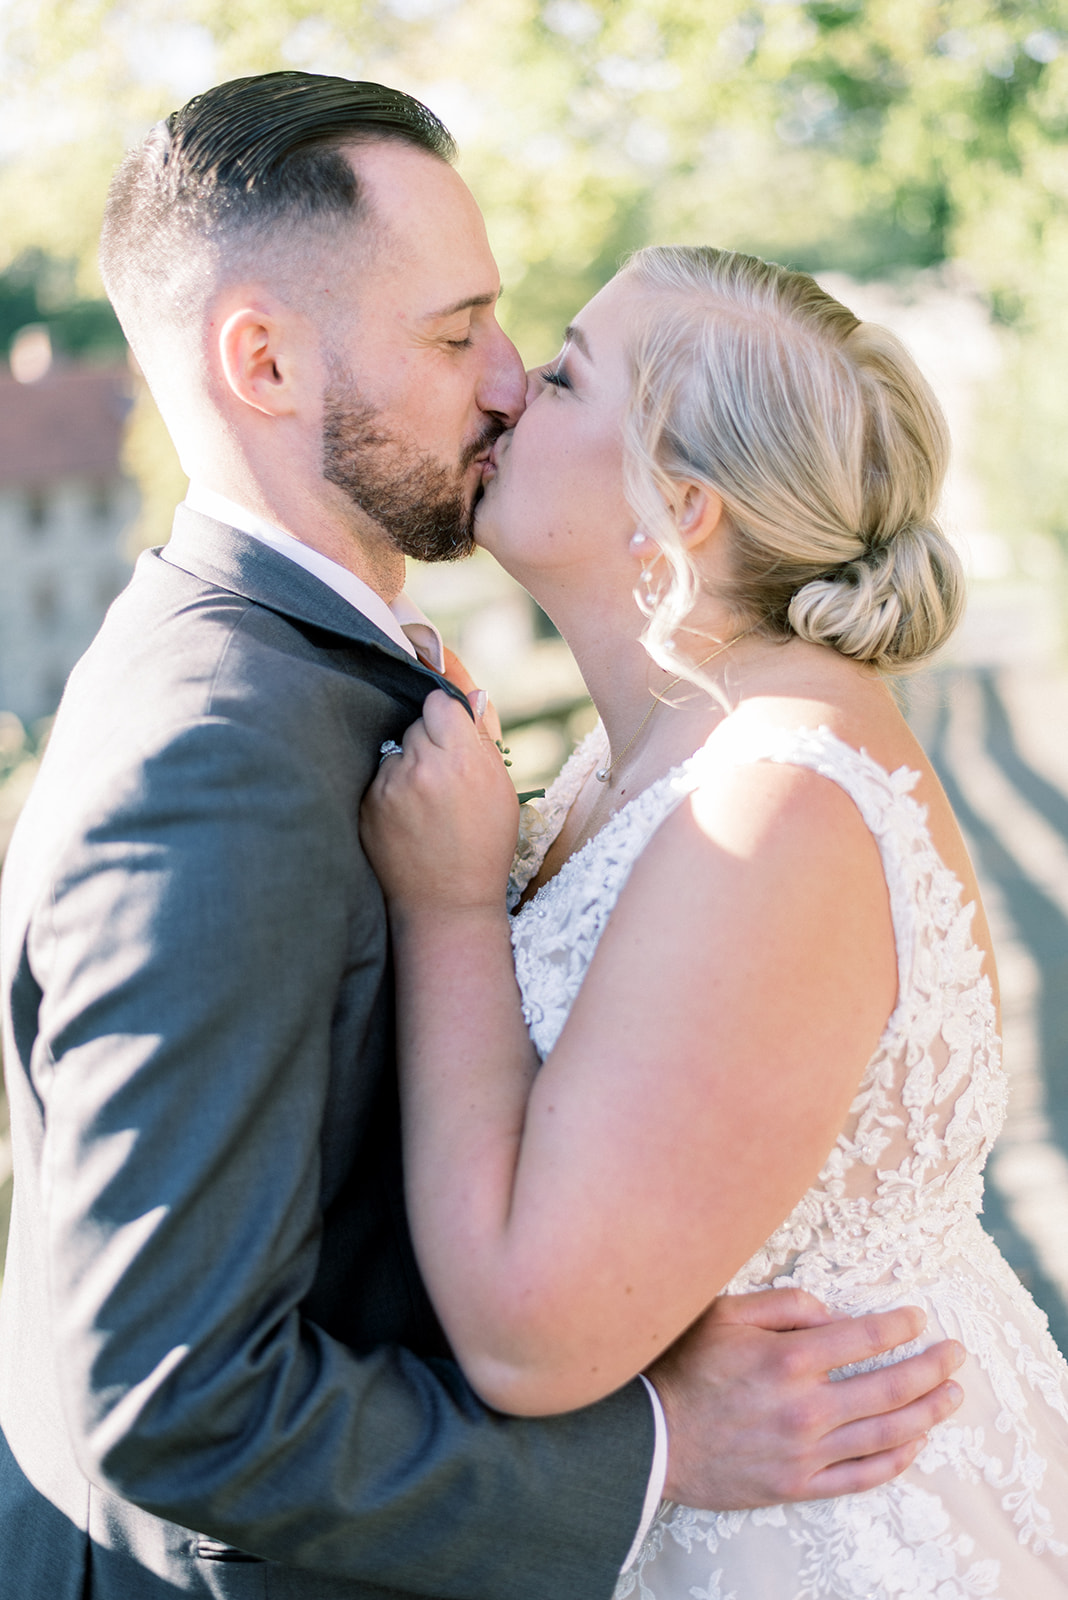 Pennsylvania wedding photographer captures newly married couple kissing during portraits